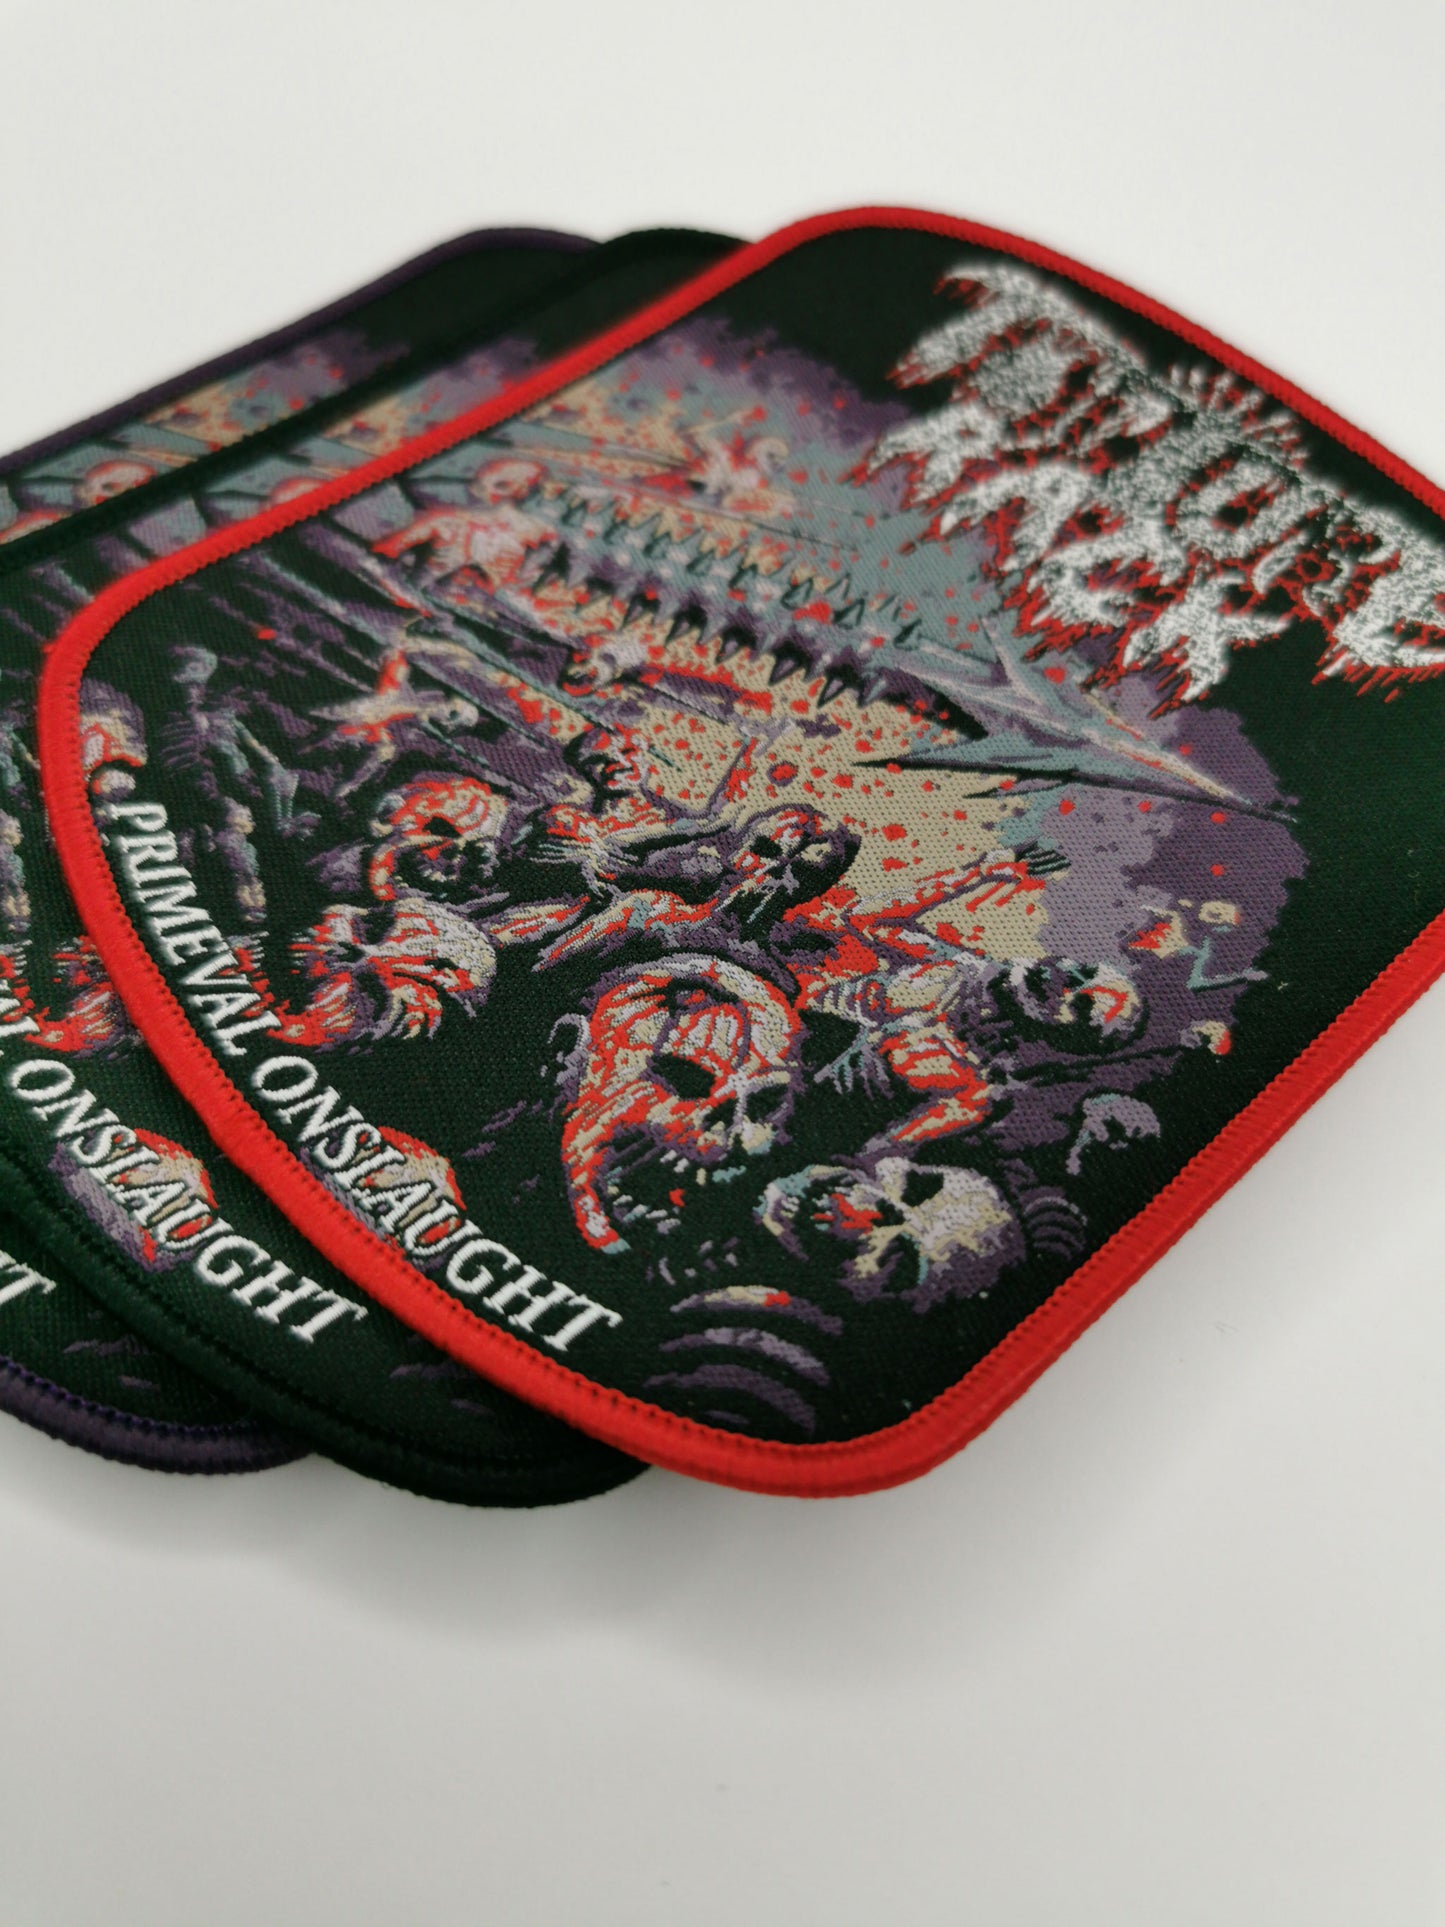 Temporal Dimensions Patches Torture Rack Primeval Onslaught Metal Woven Patches